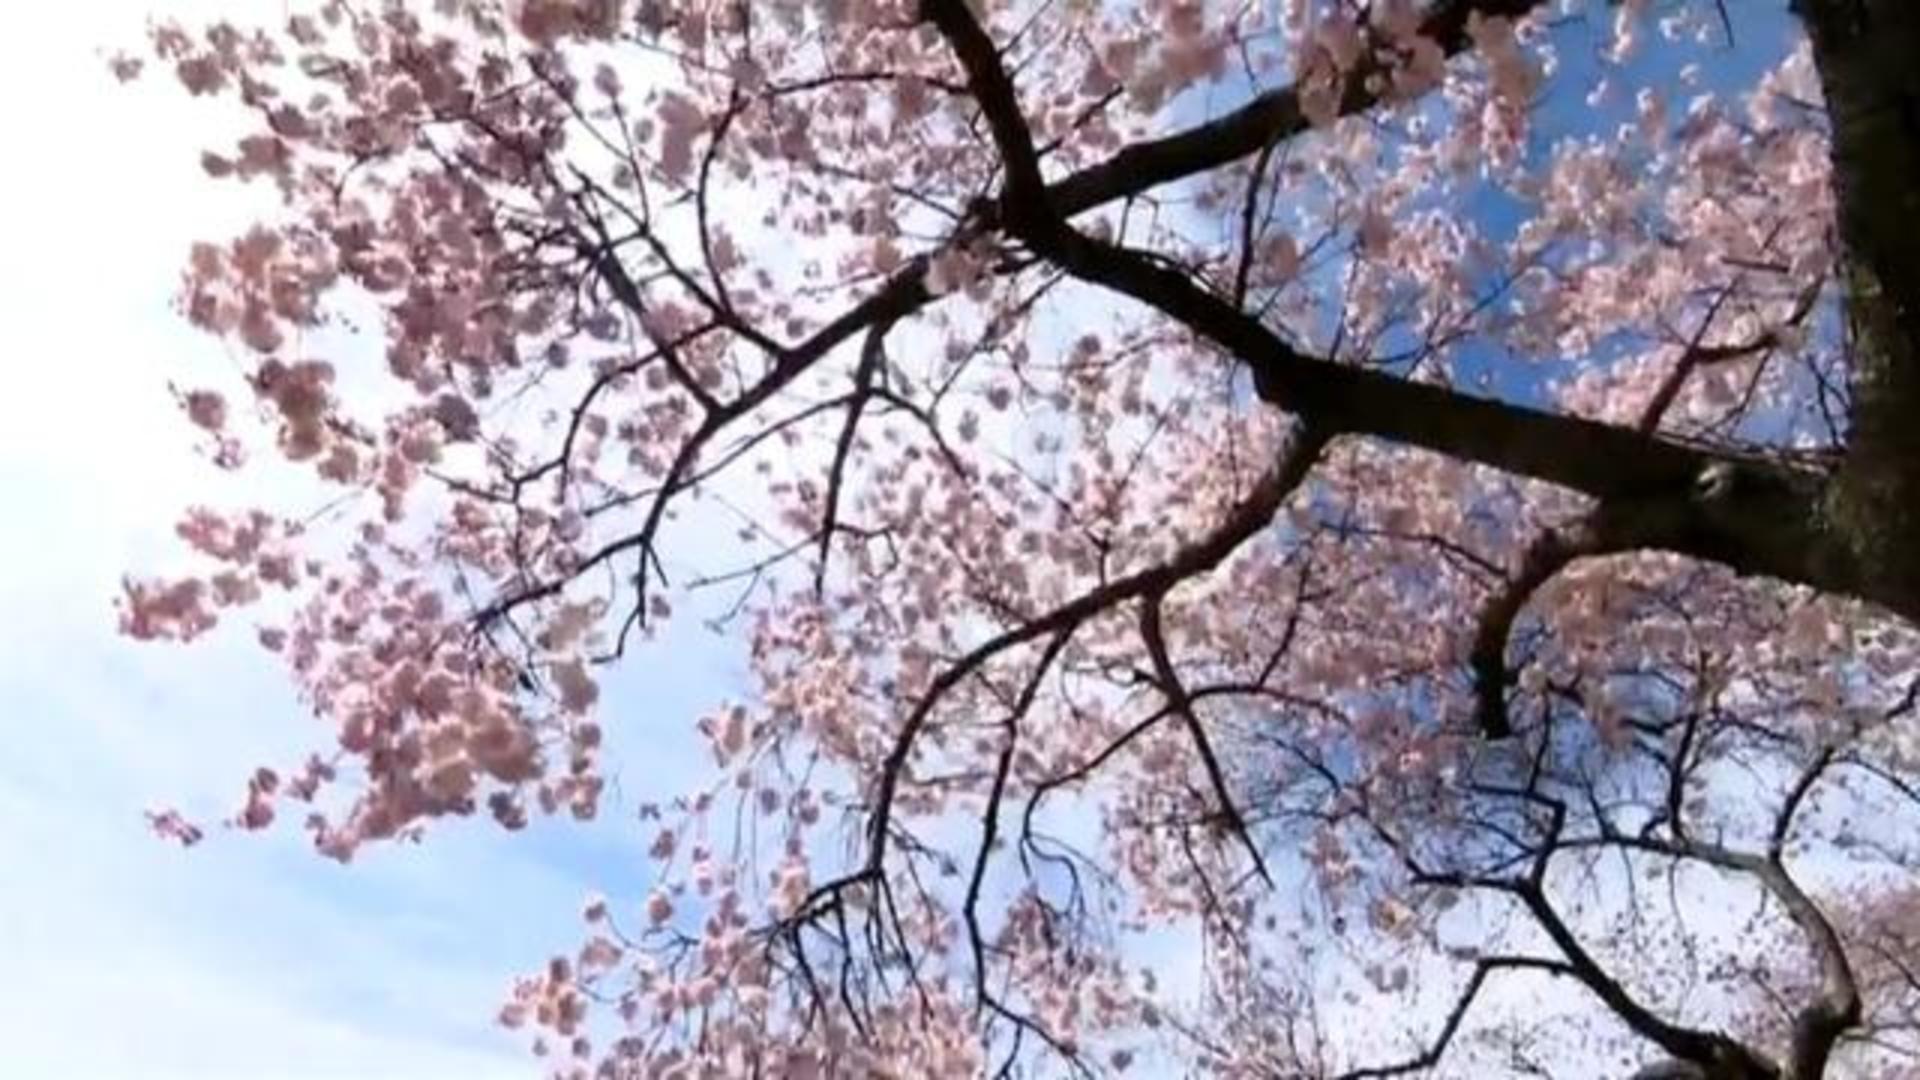 Cherry blossoms mark the beginning of spring